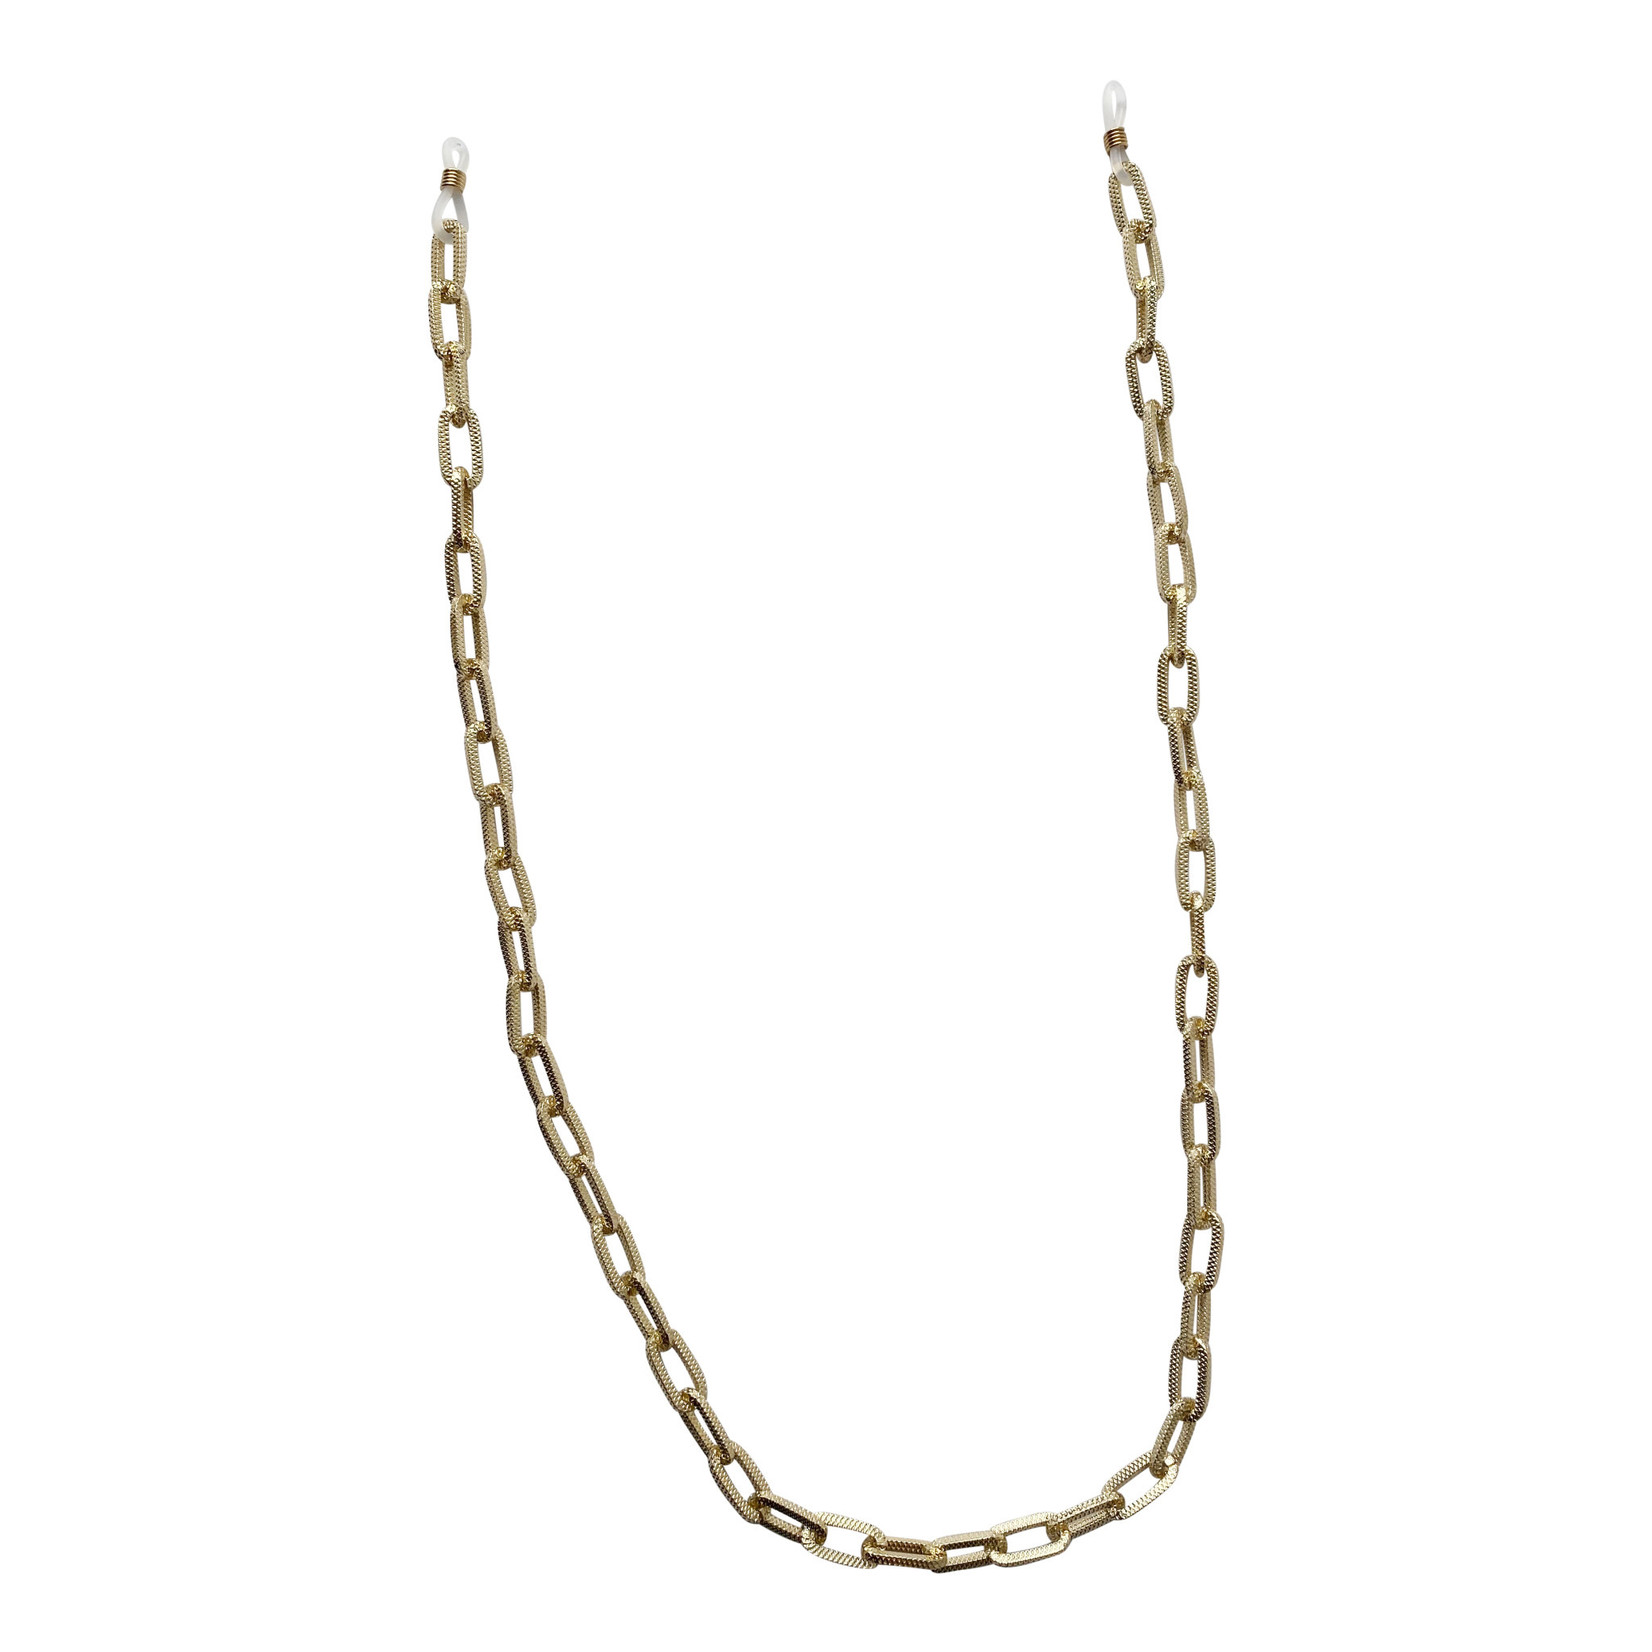 Wyld Blue Hammered Link Sunglass Chain